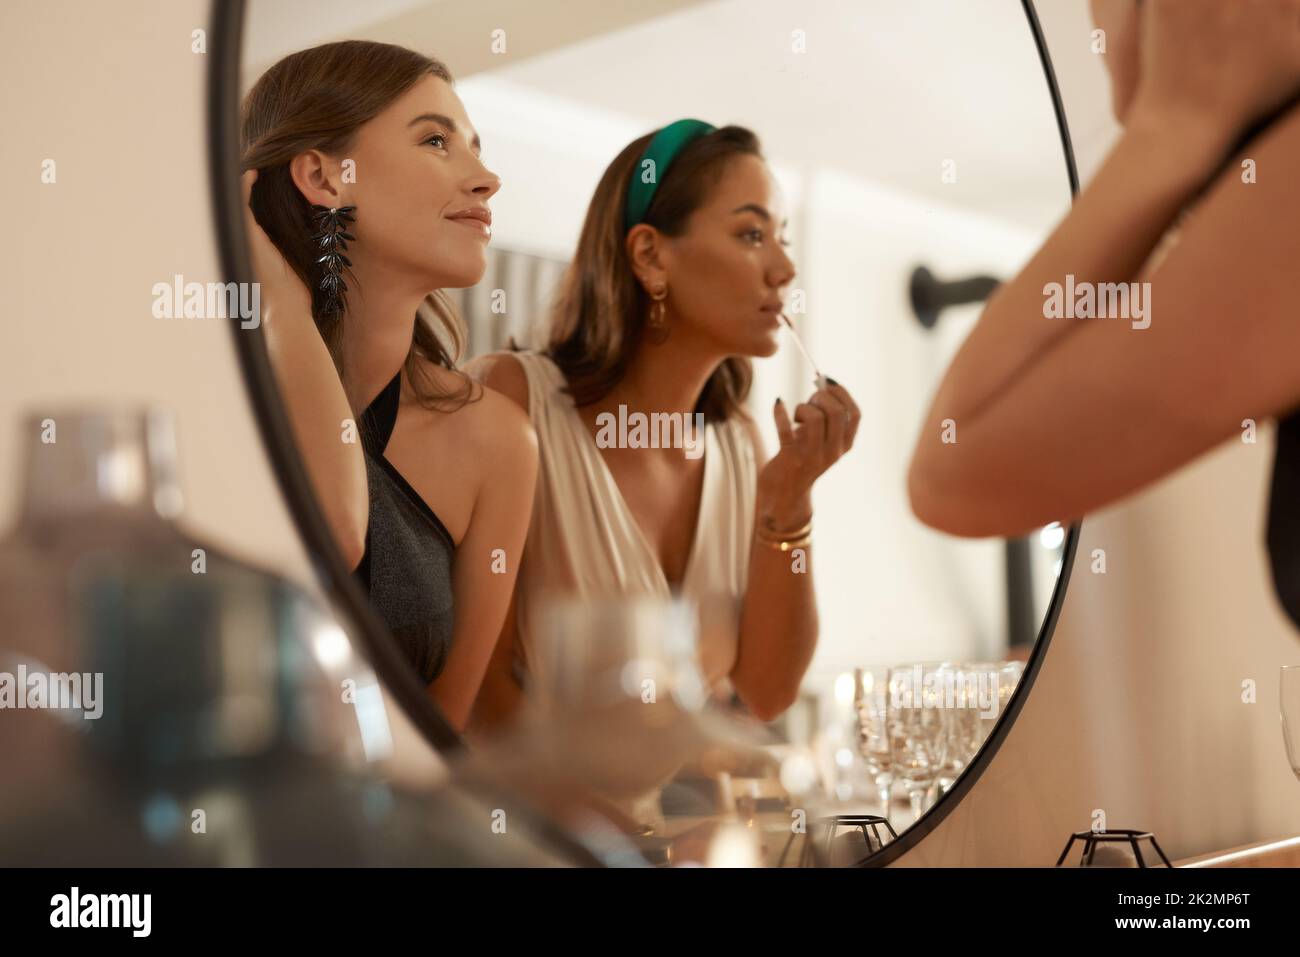 Got to keep the slay intact. Shot of two young friends standing together and using a mirror to touch up their makeup at a dinner party. Stock Photo